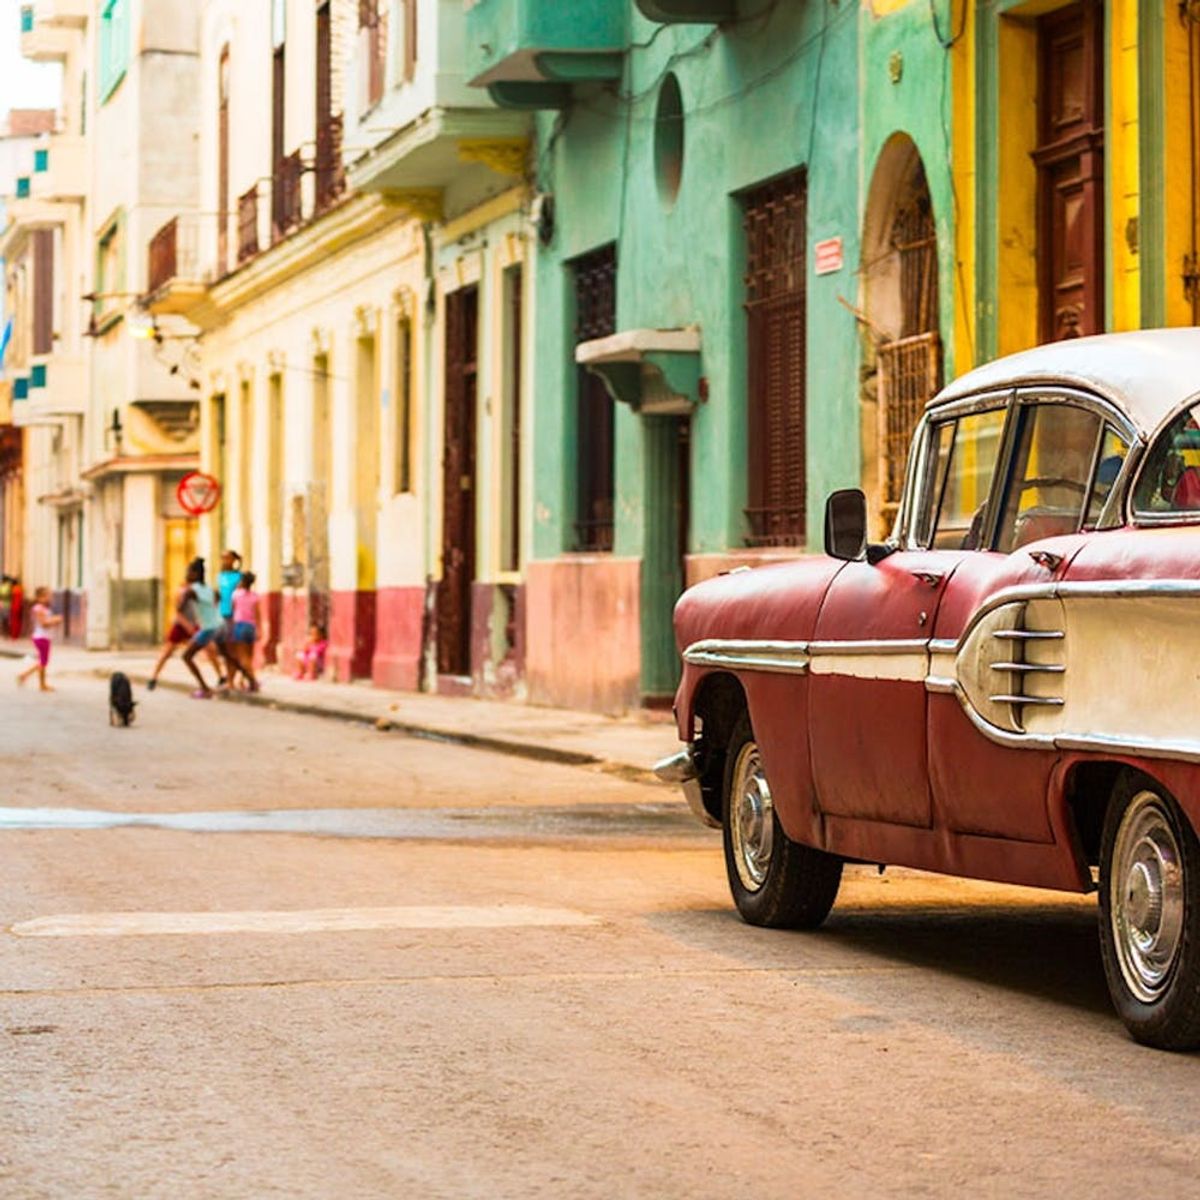 Why Today Is a Monumental Day for Anyone Who Has Cuba on Their Bucket List